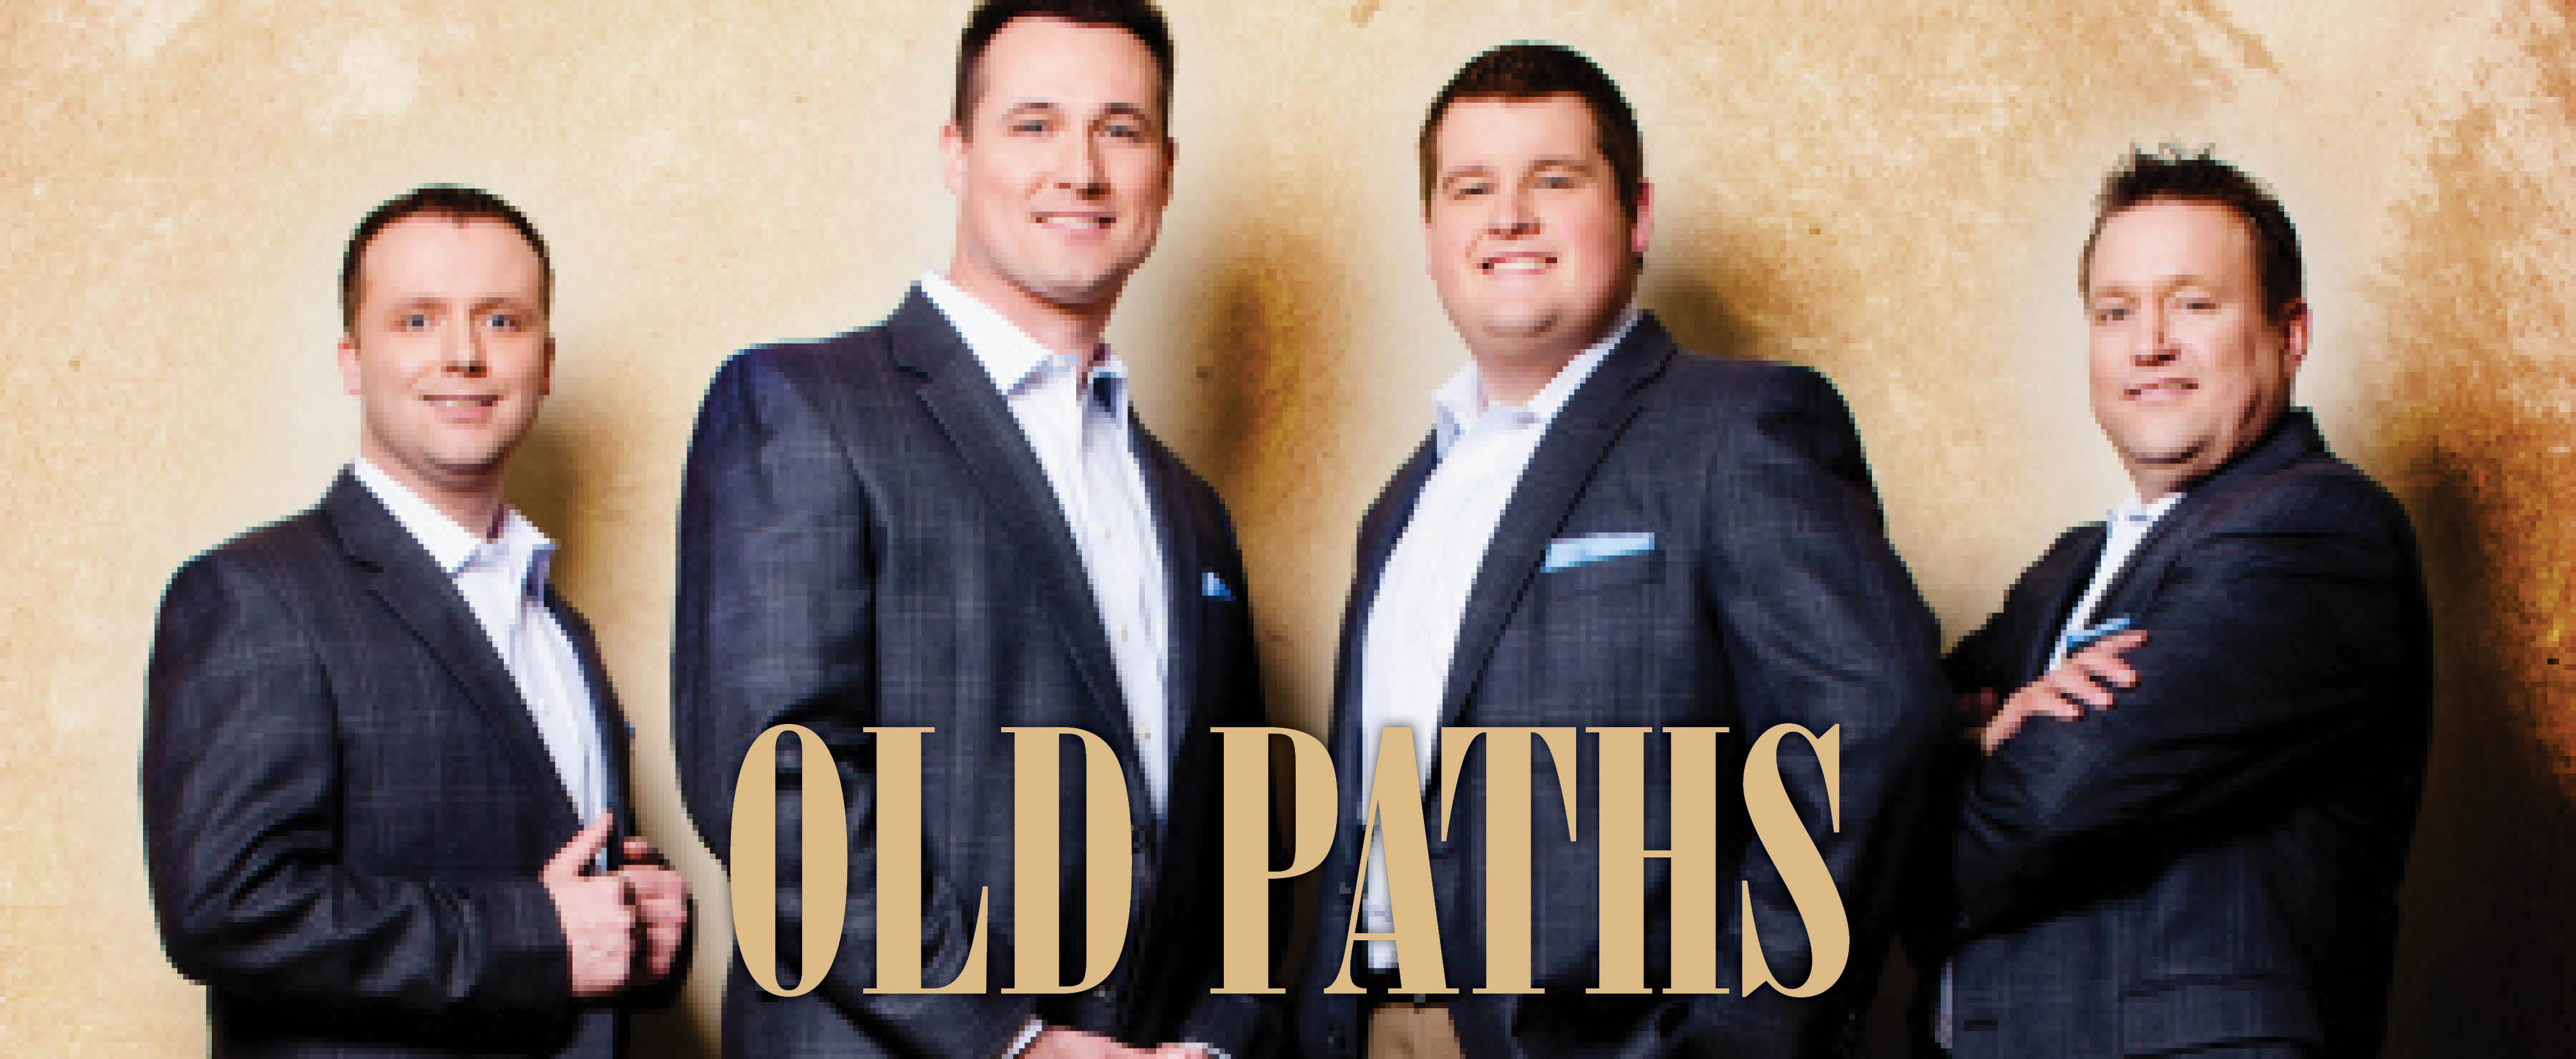 A Return to The Old Paths – Absolutely Gospel Music